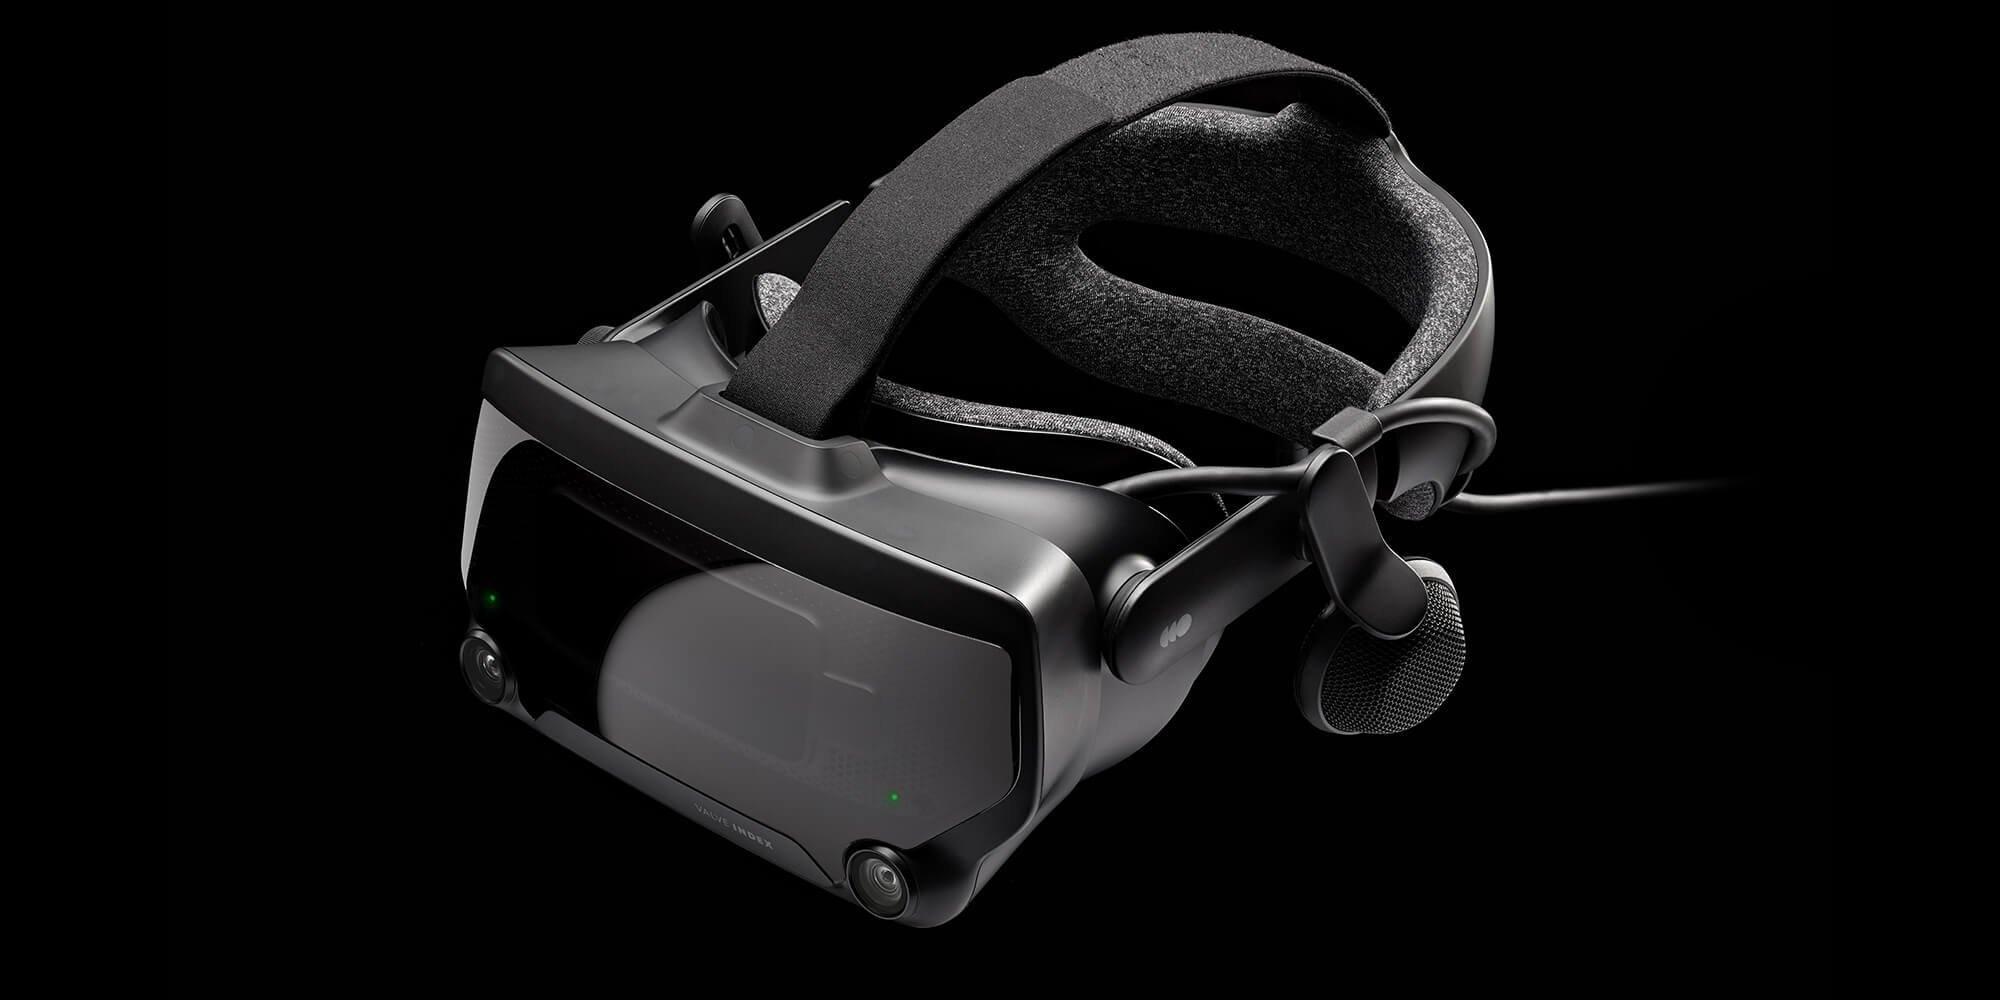 Valve's Index headset is sold out and VR 'Half-Life' isn't even here yet